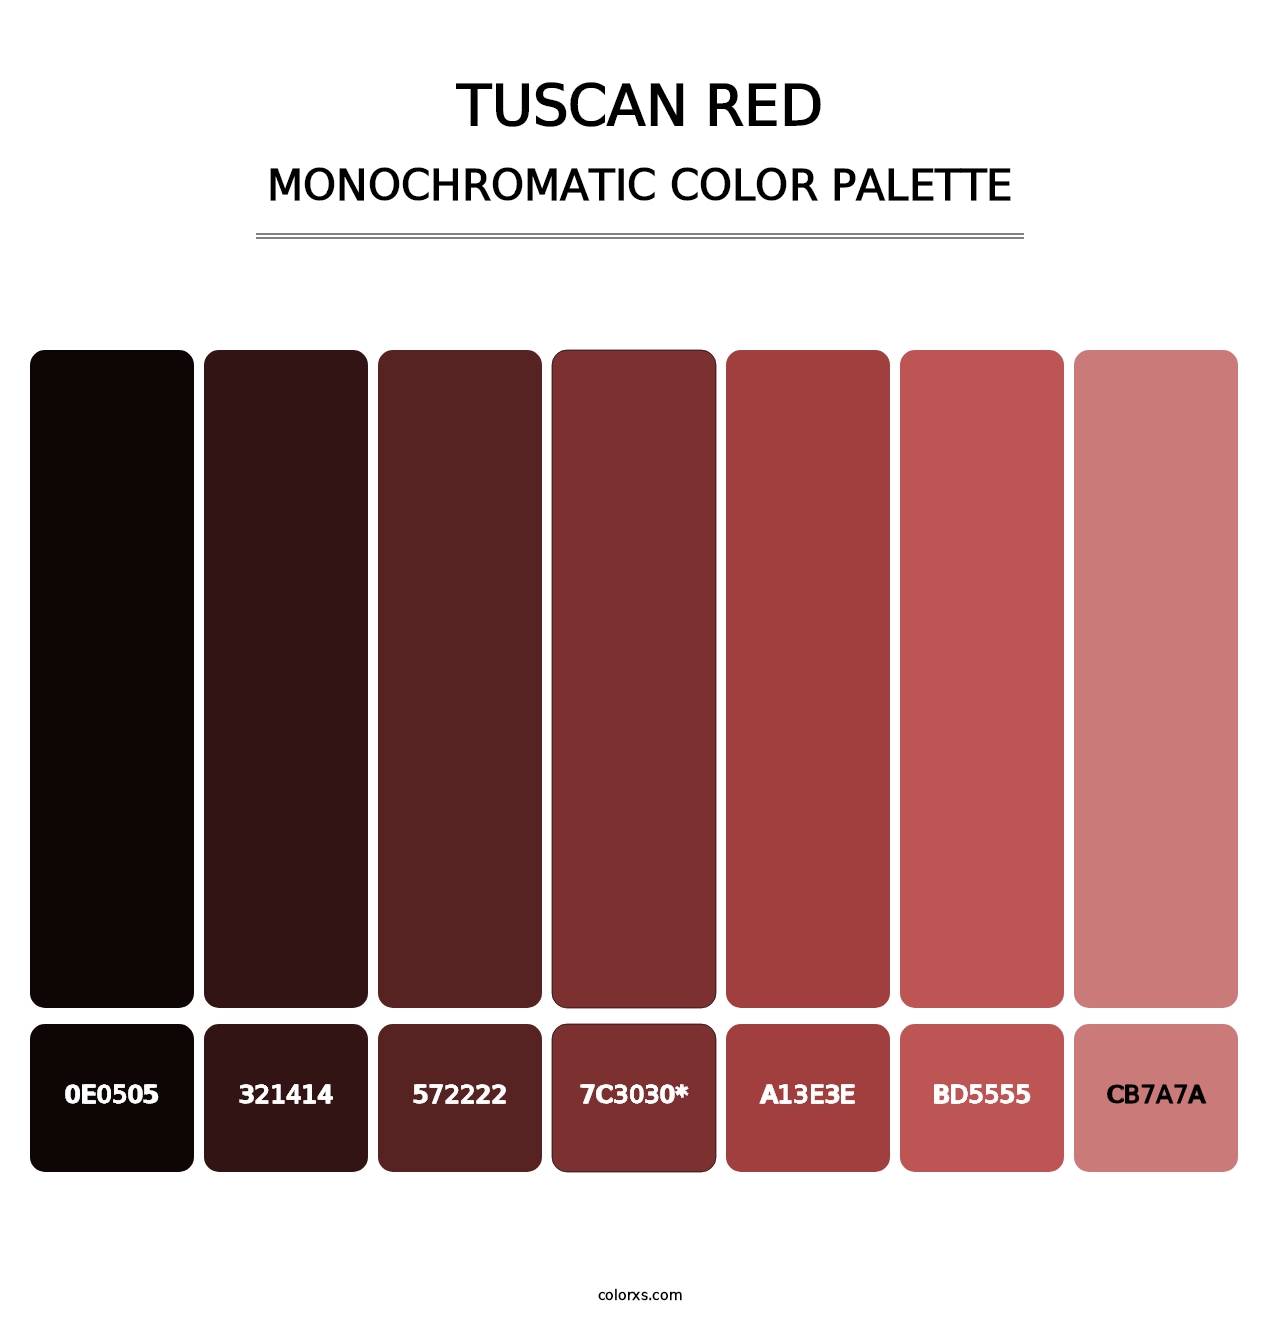 Tuscan Red - Monochromatic Color Palette